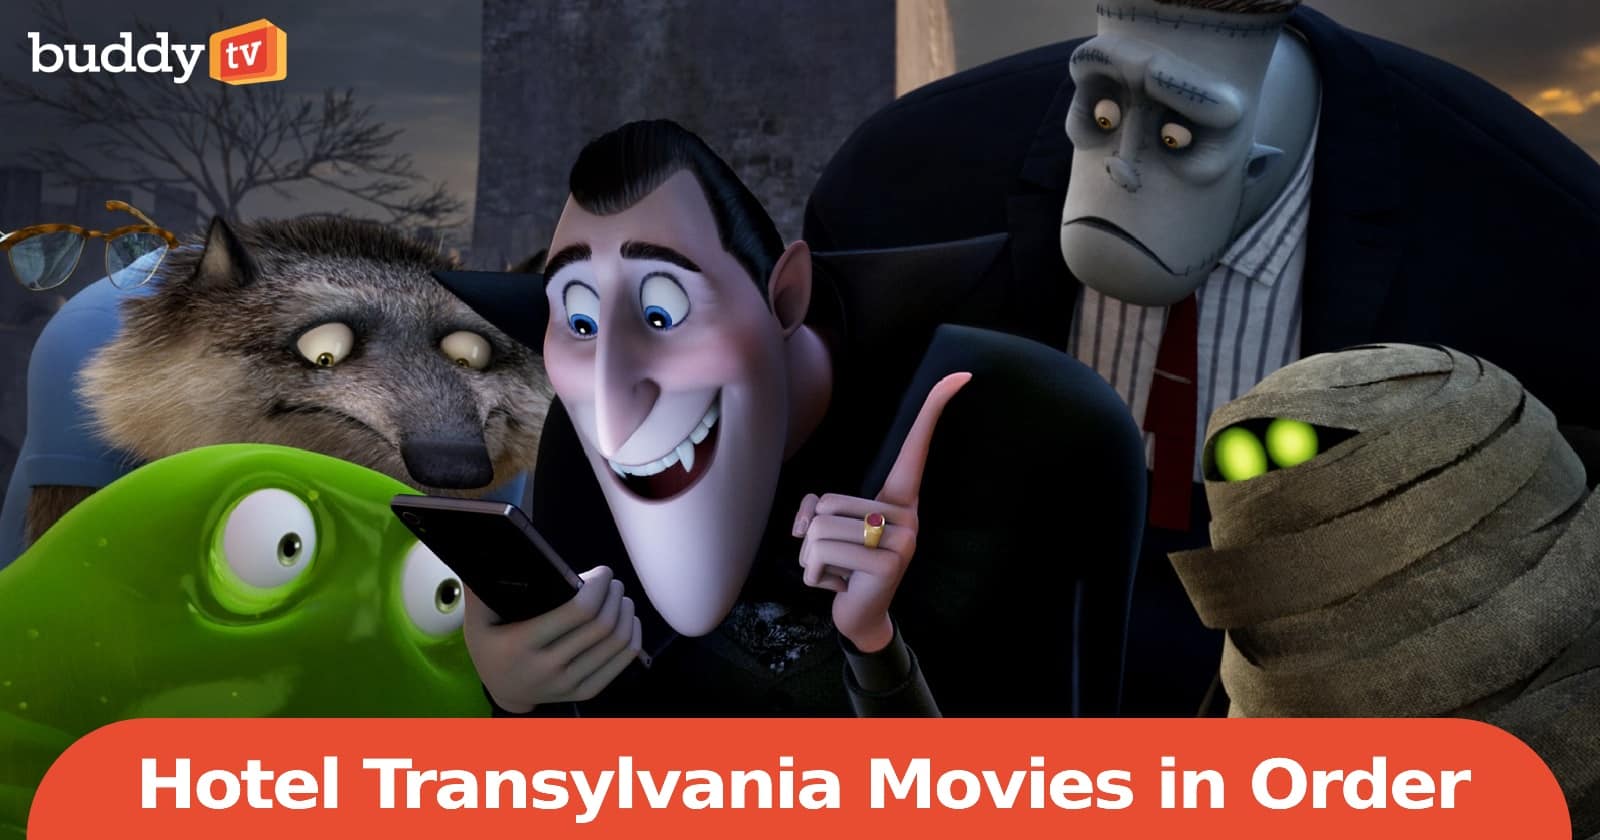 All Hotel Transylvania Movies in Order: How to Watch